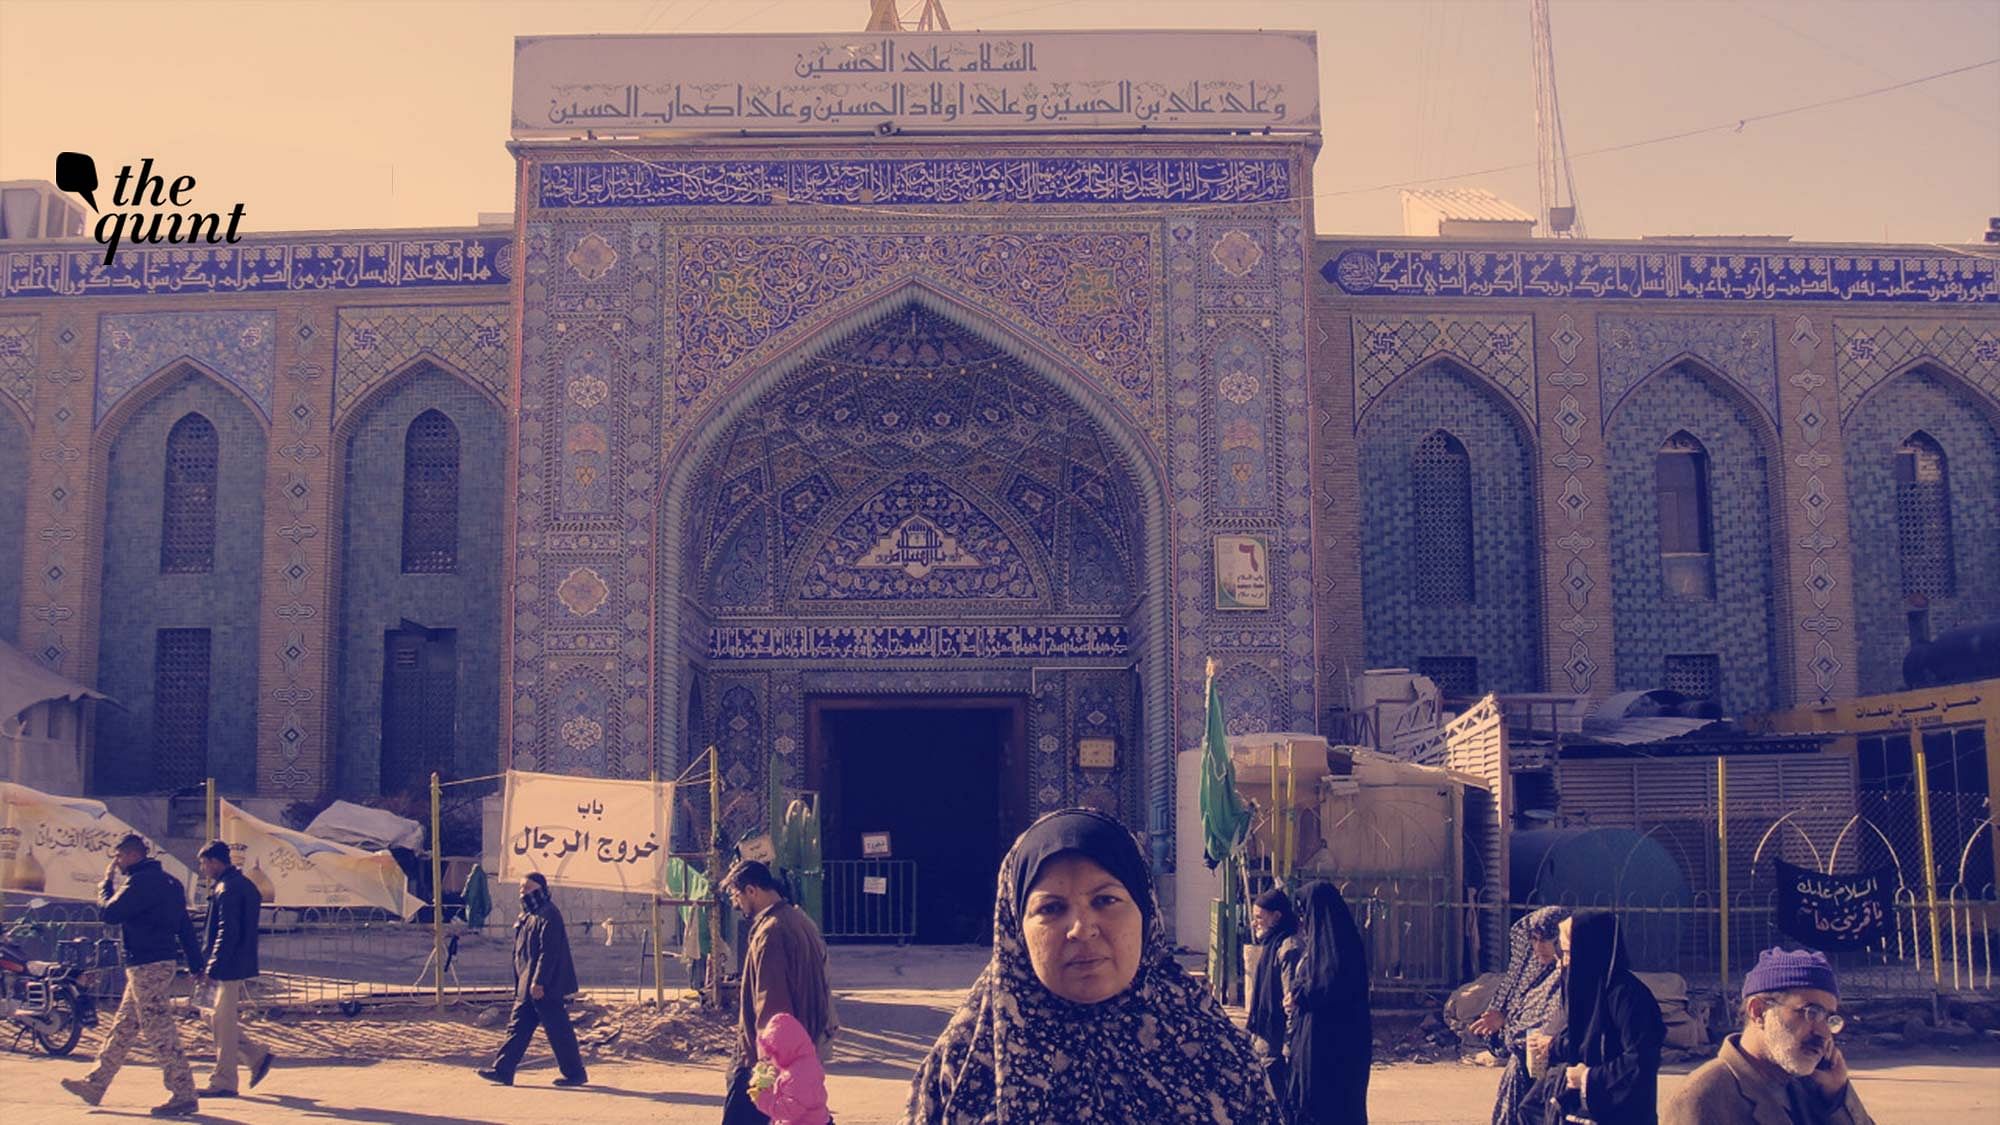 Image of the author, Rana Safvi, at the shrine of Imam Hussain in Karbala in 2010.